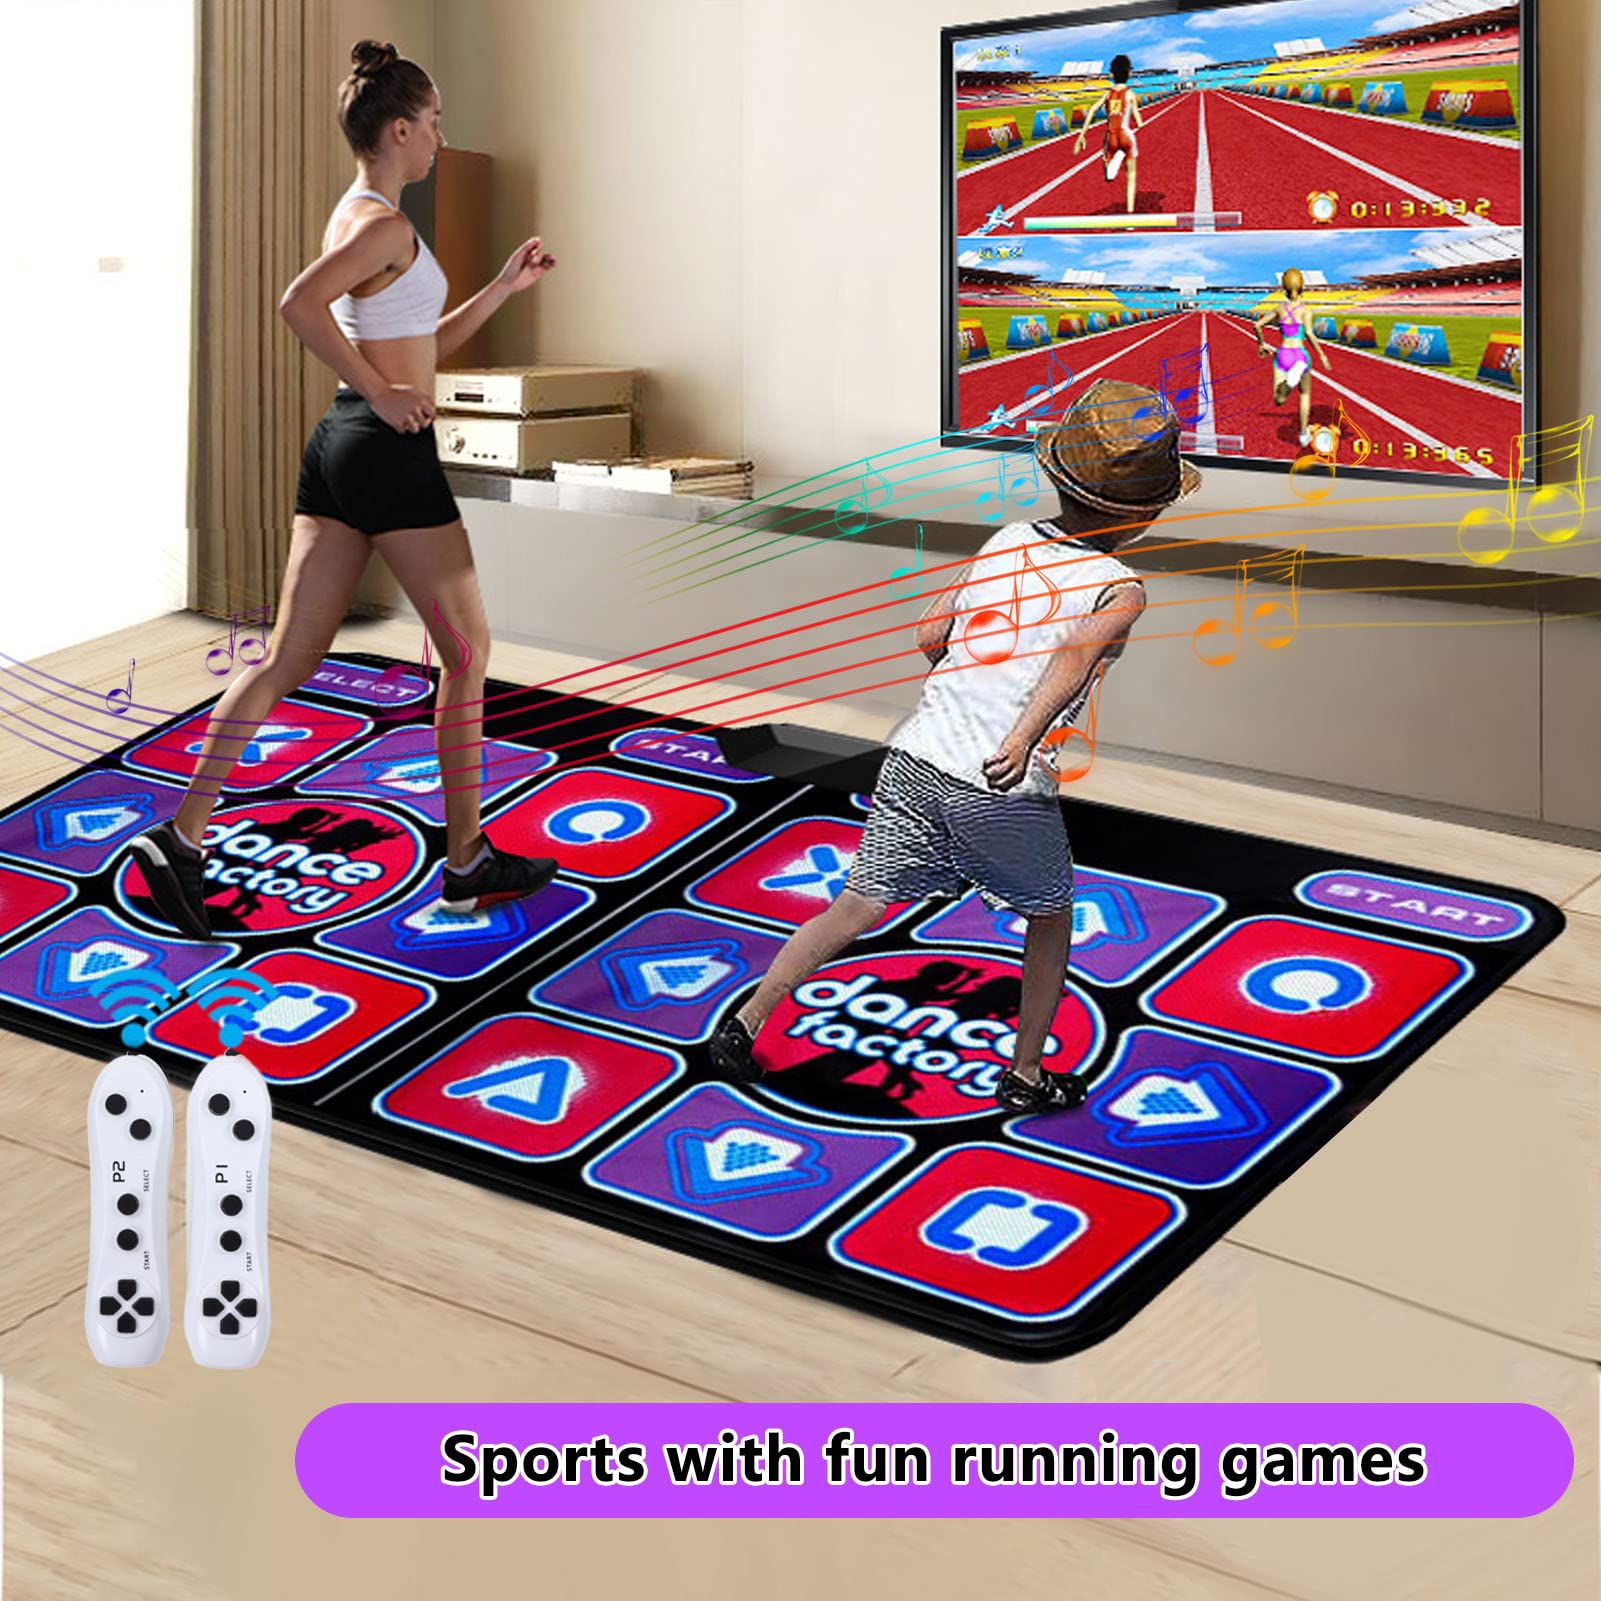 plplaaoo Dance Mat, Dance Mat for Kids and Adults,Musical Electronic Dance Mat,Music Dance Pad Double Player Exercise Foldable Early Education Electronic Dance Mat for Living Room with AV Cable, d